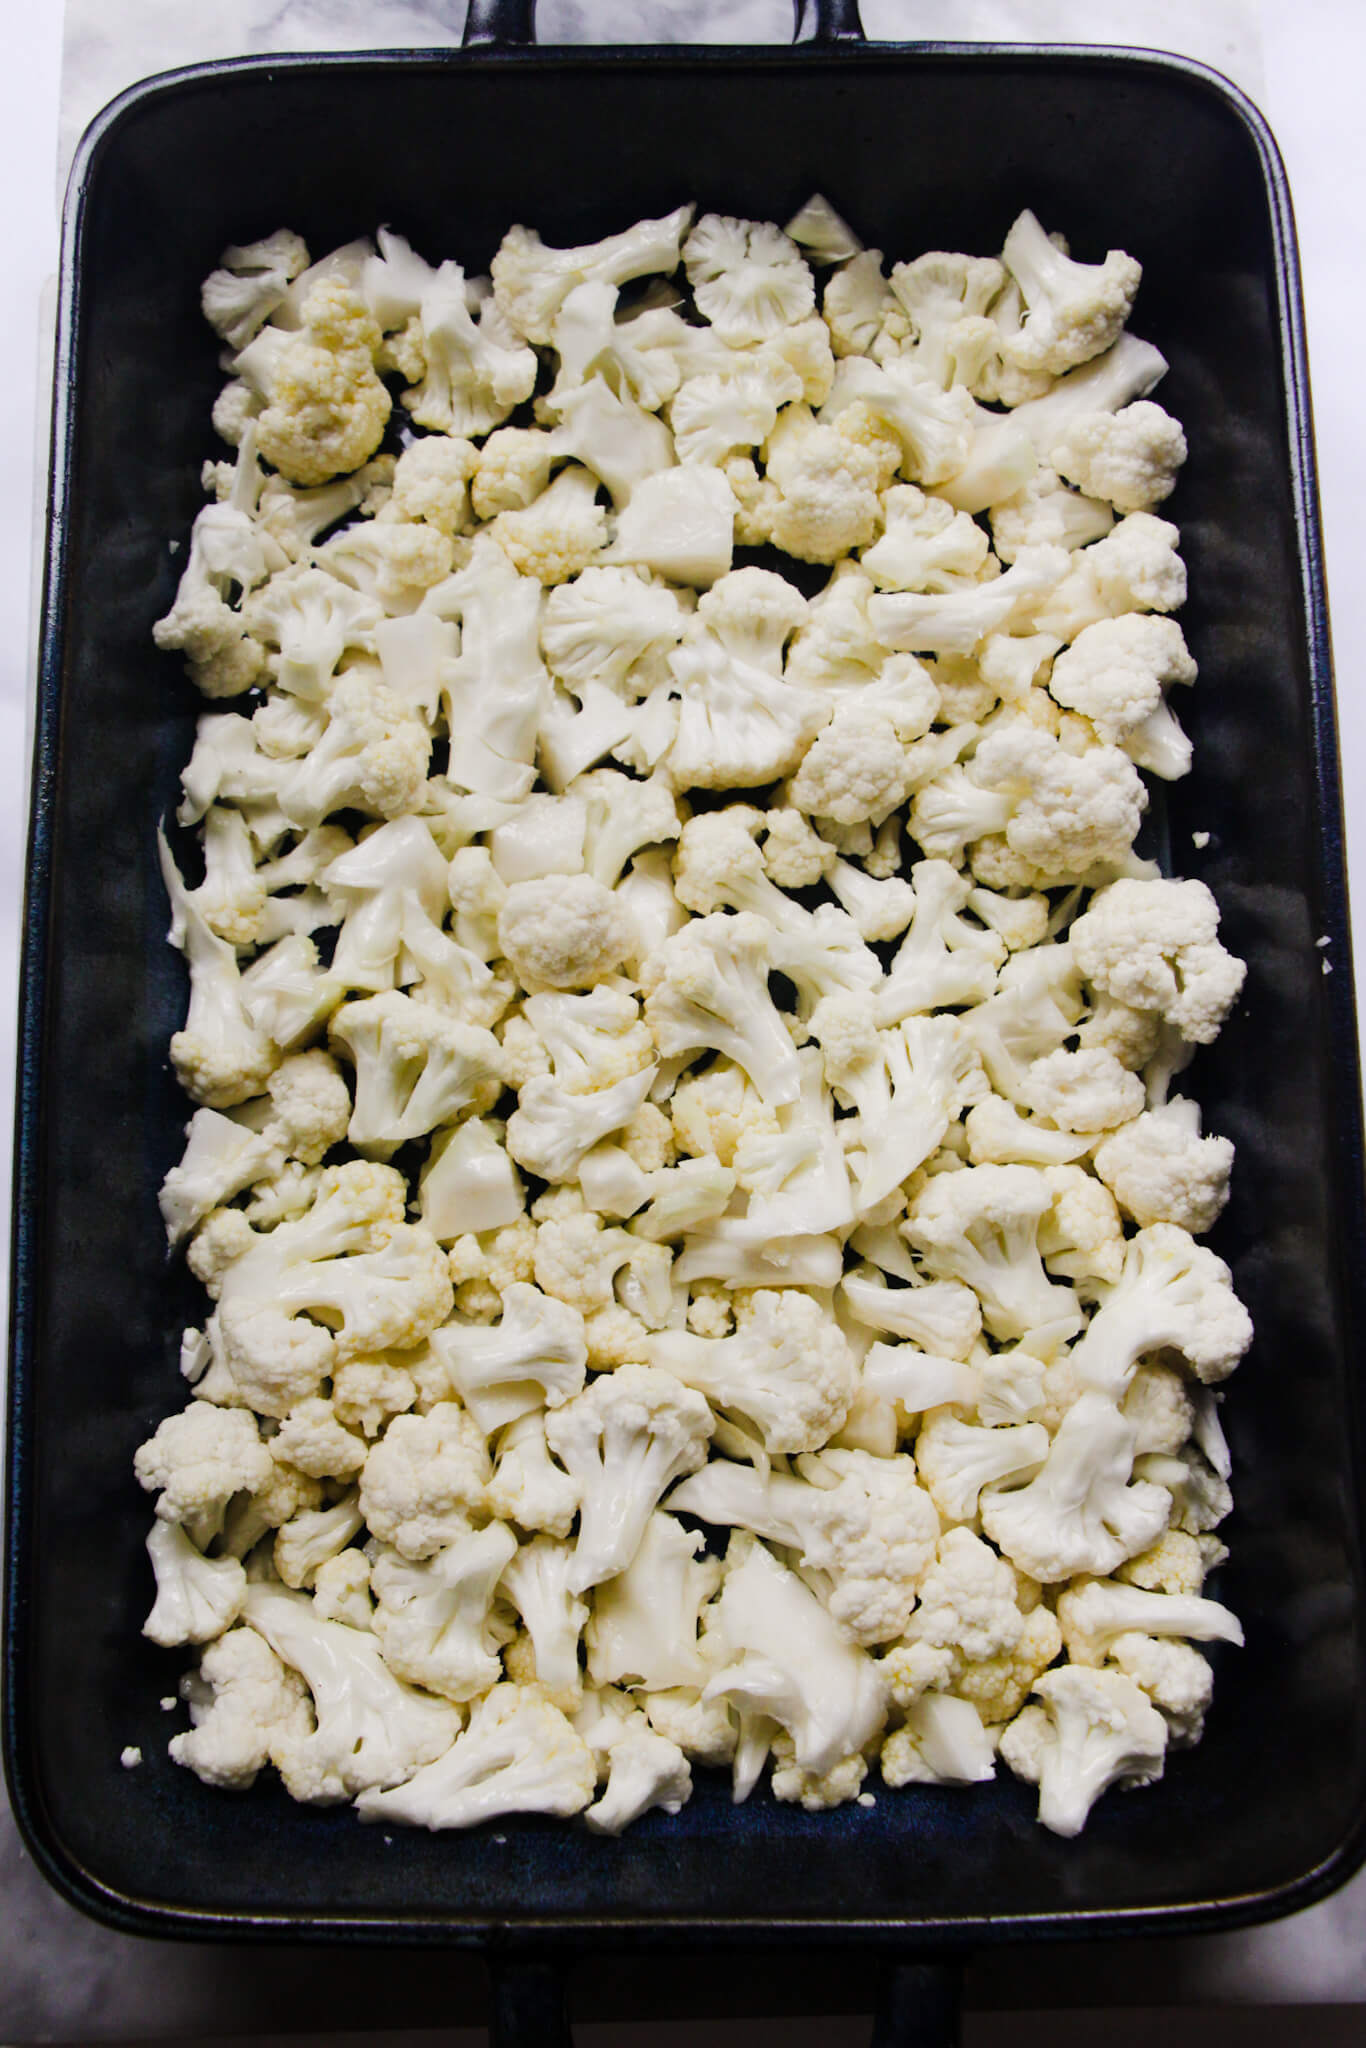 Cauliflower in a blue oven dish ready to be roasted.